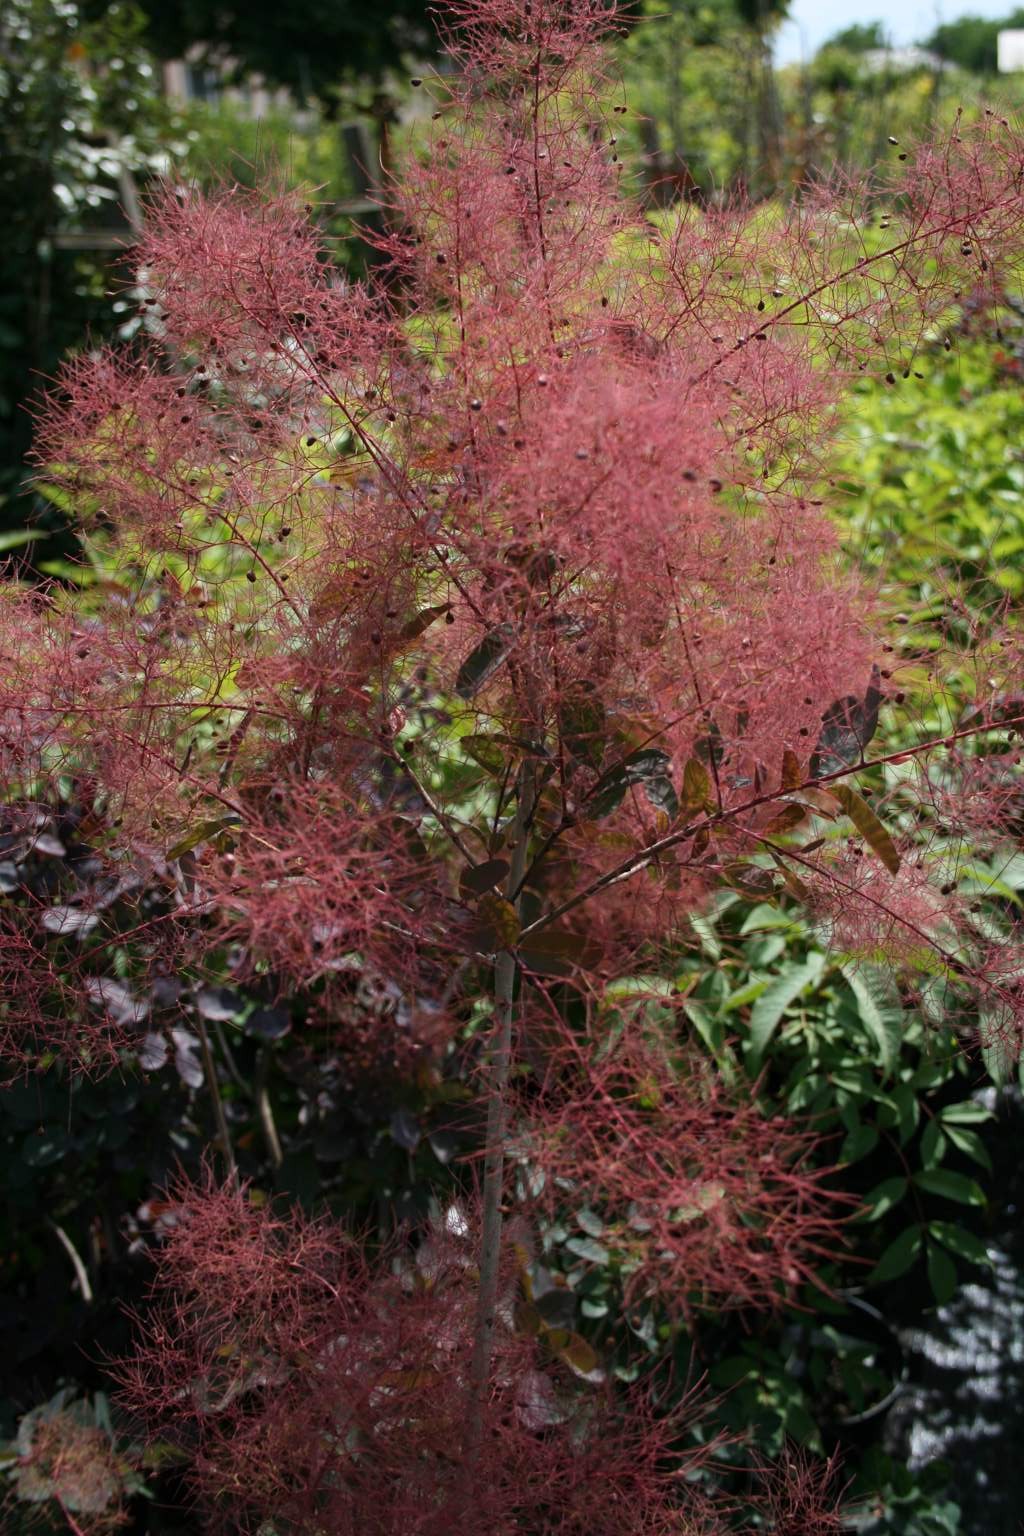 Perukowiec podolski "Young Lady" / Cotinus coggygria "Young Lady"